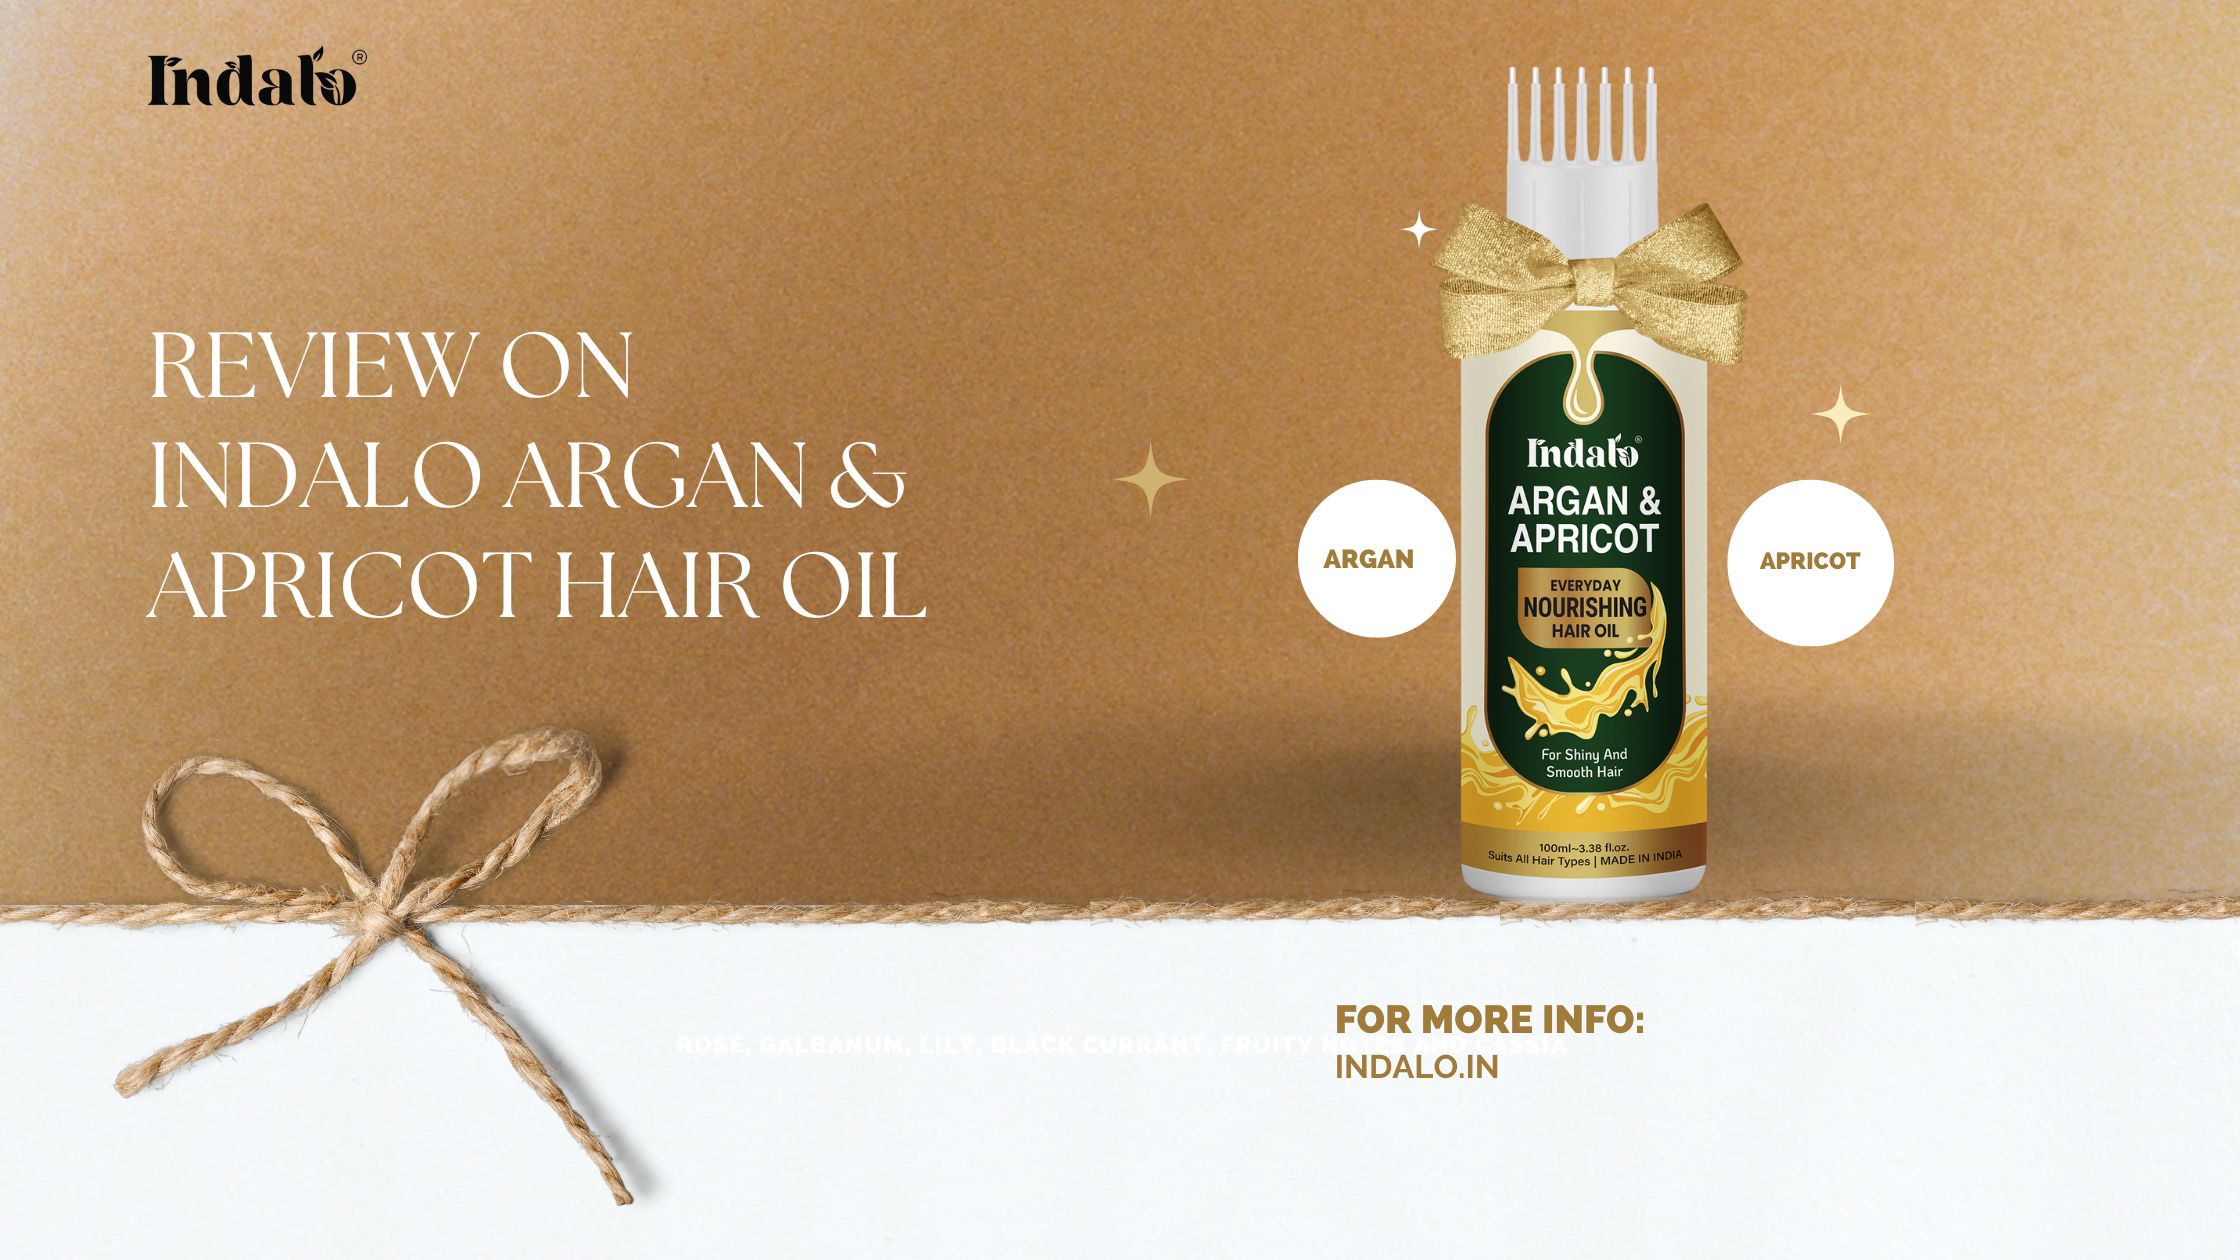 Review on Indalo Argan & Apricot Hair oil